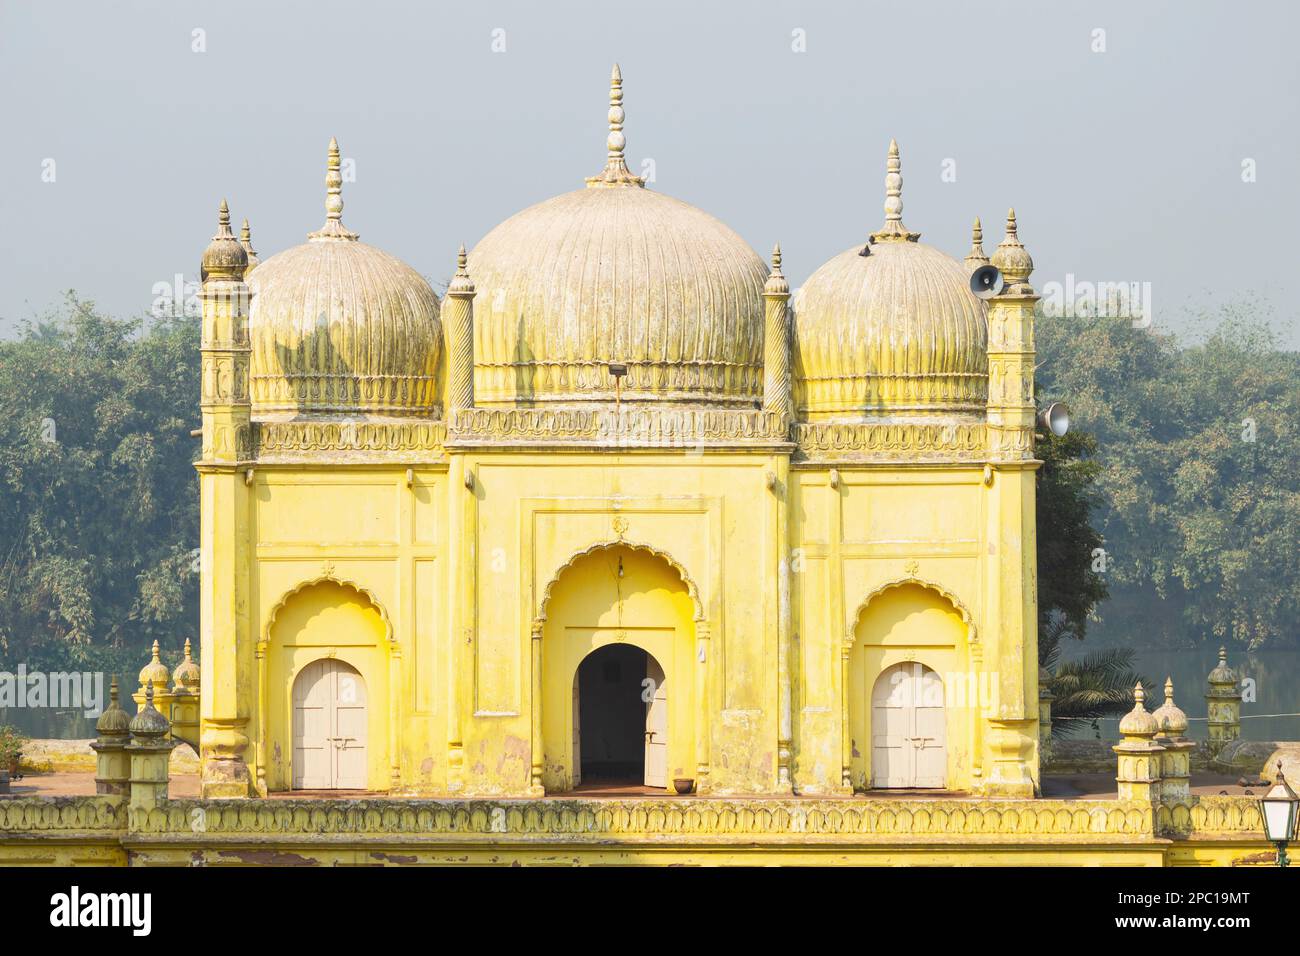 Rear View of Yellow Mosque, Built by Nawab Siraj Ud Daulah in 1757, in the Complex of Hazar Duari Palace, Murshidabad, West Bengal, India. Stock Photo